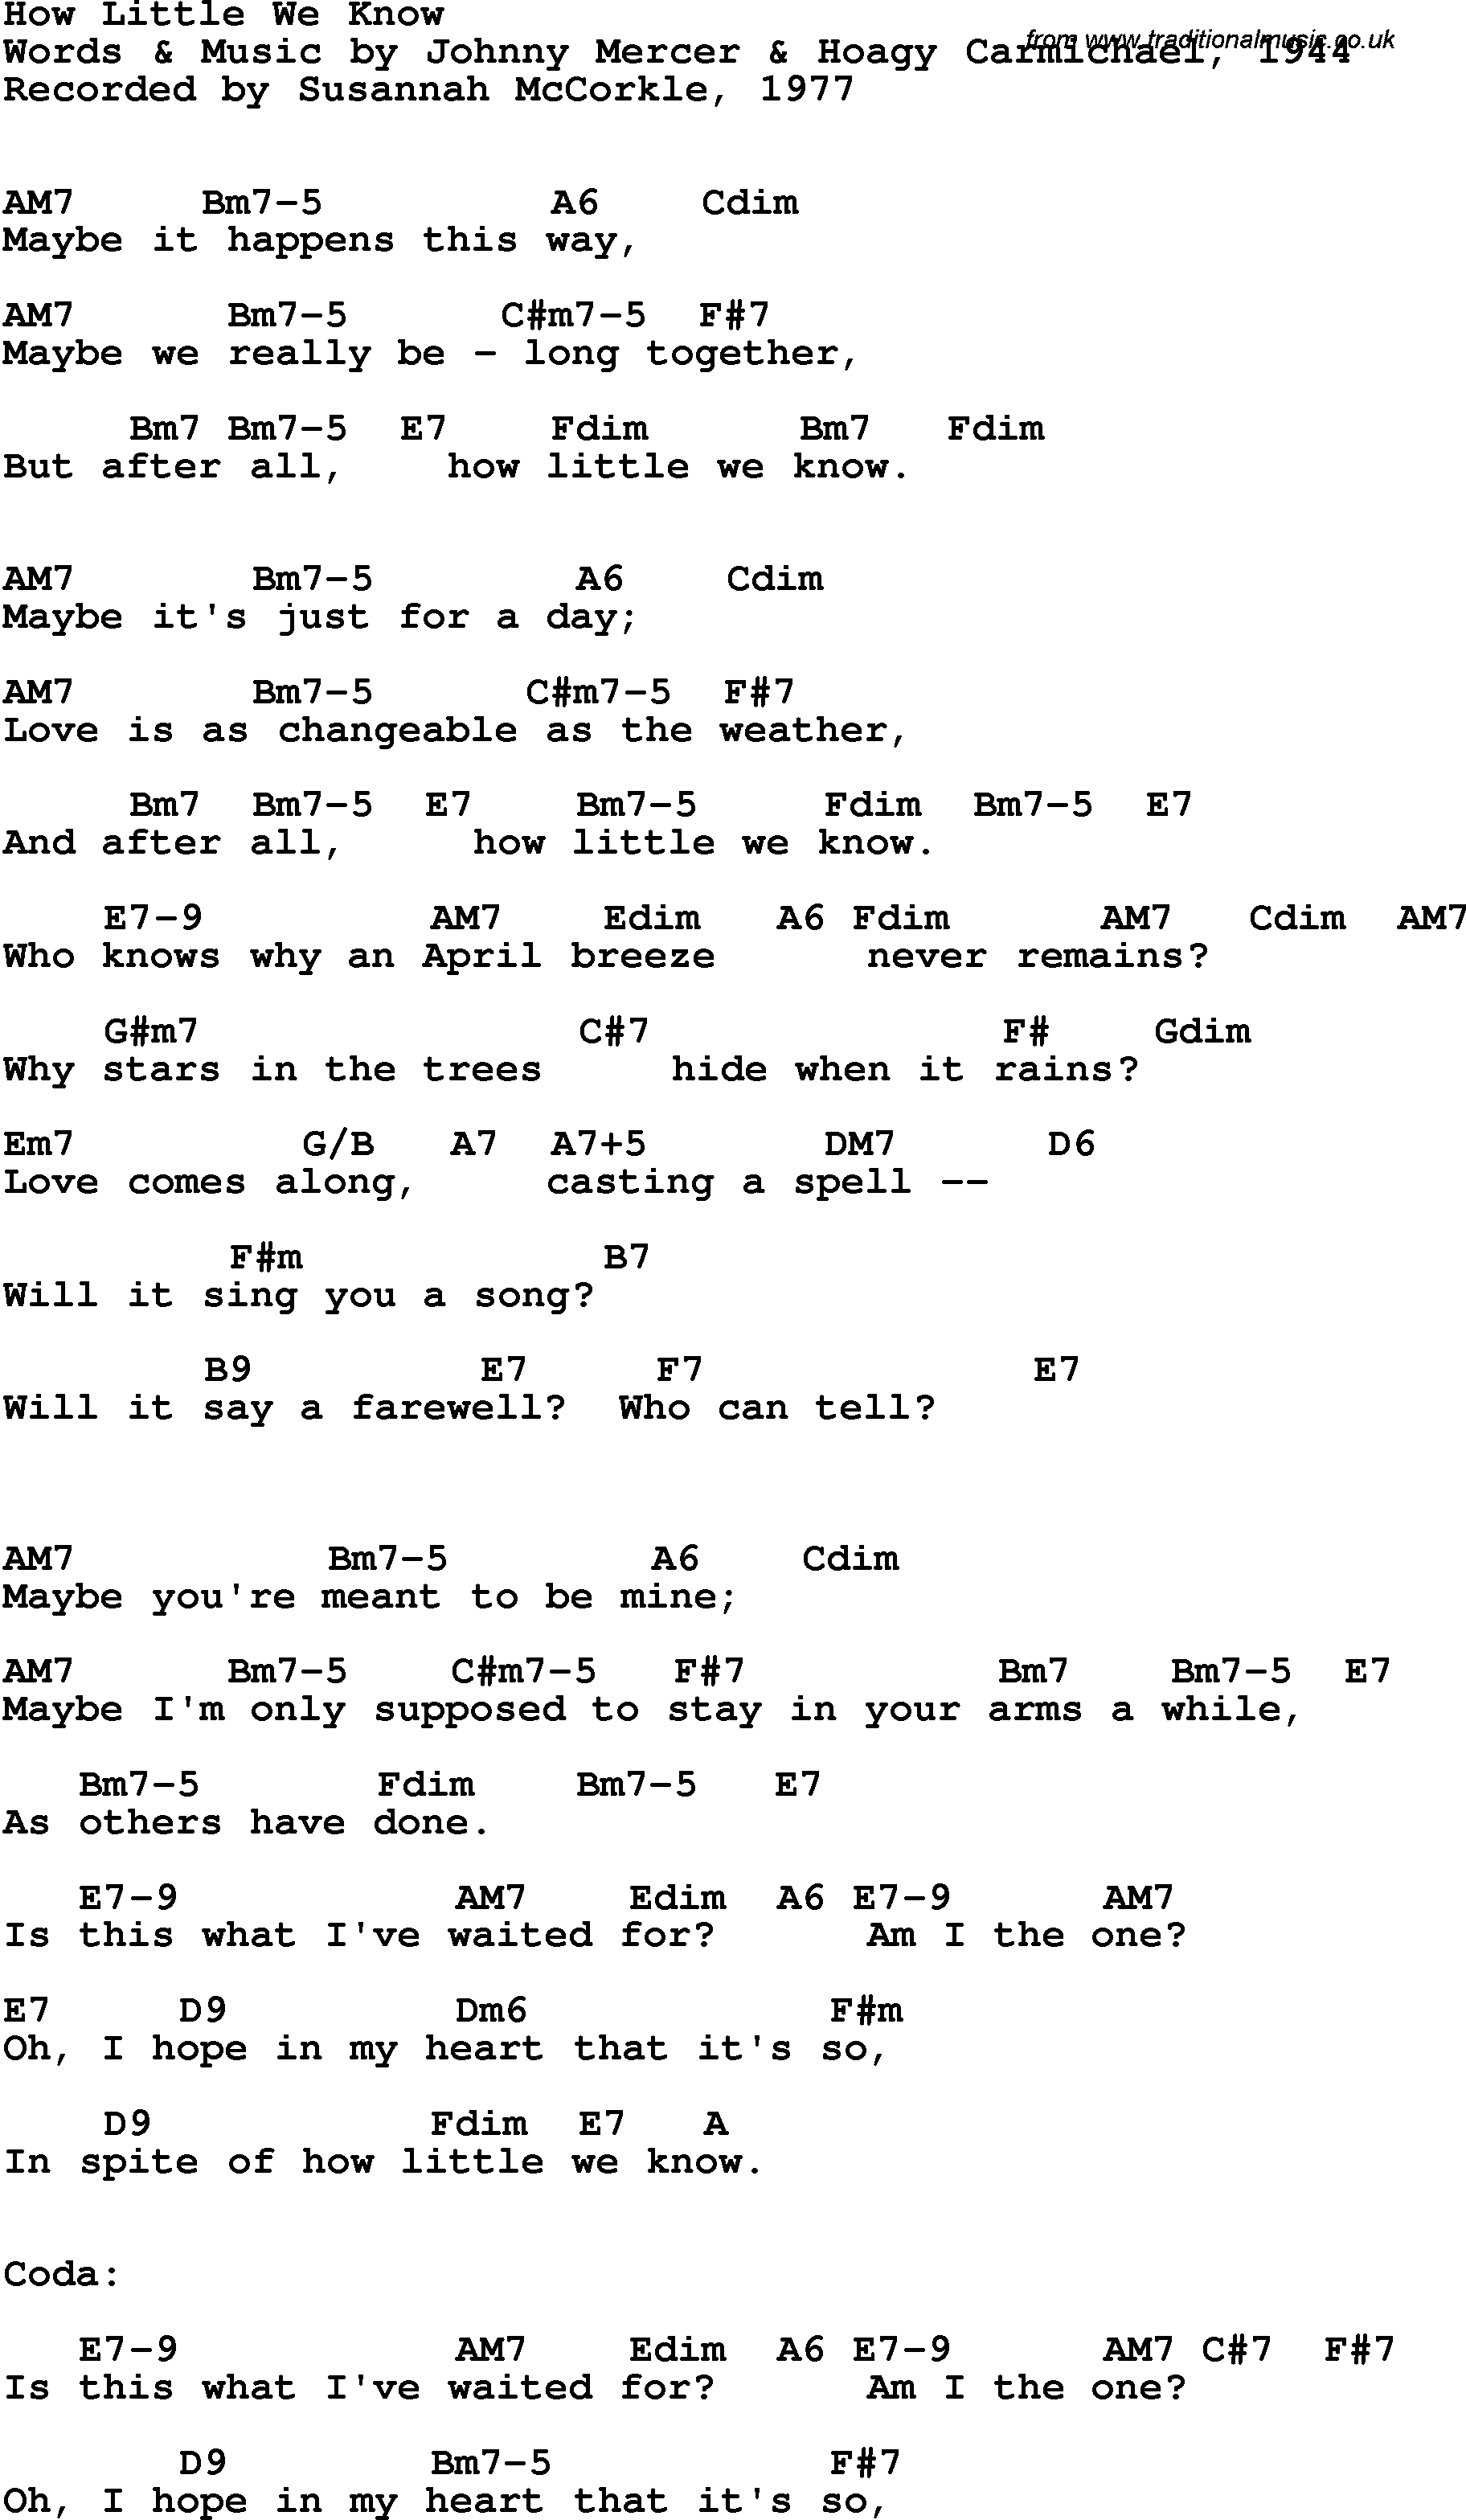 Song Lyrics with guitar chords for How Little We Know - Susannah McCorkle, 1977